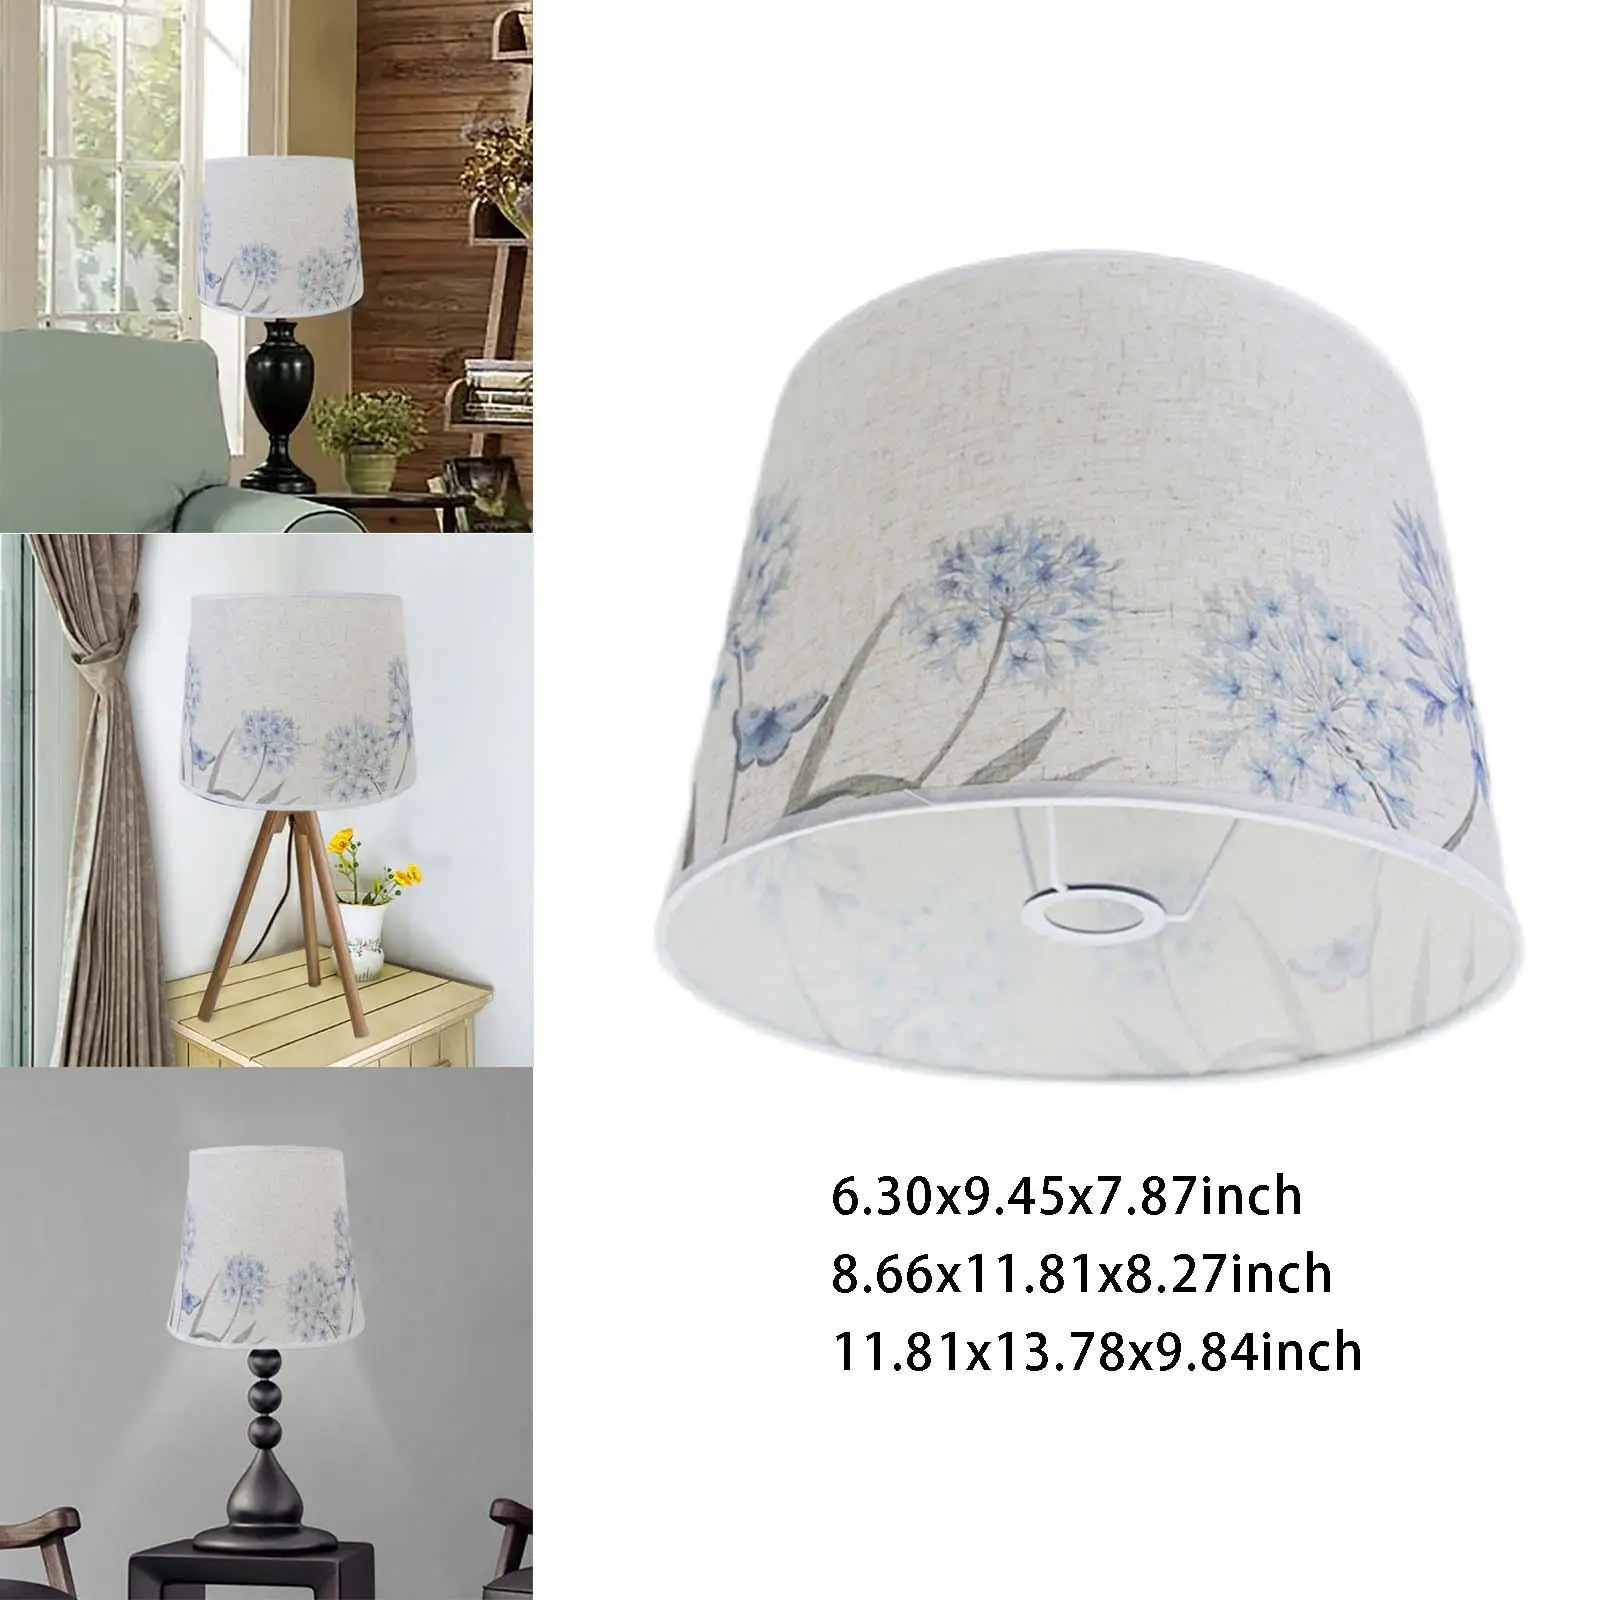 Retro Style Simple Lamp Shade Bouffant Lampshade Frame Cover Removable Decor